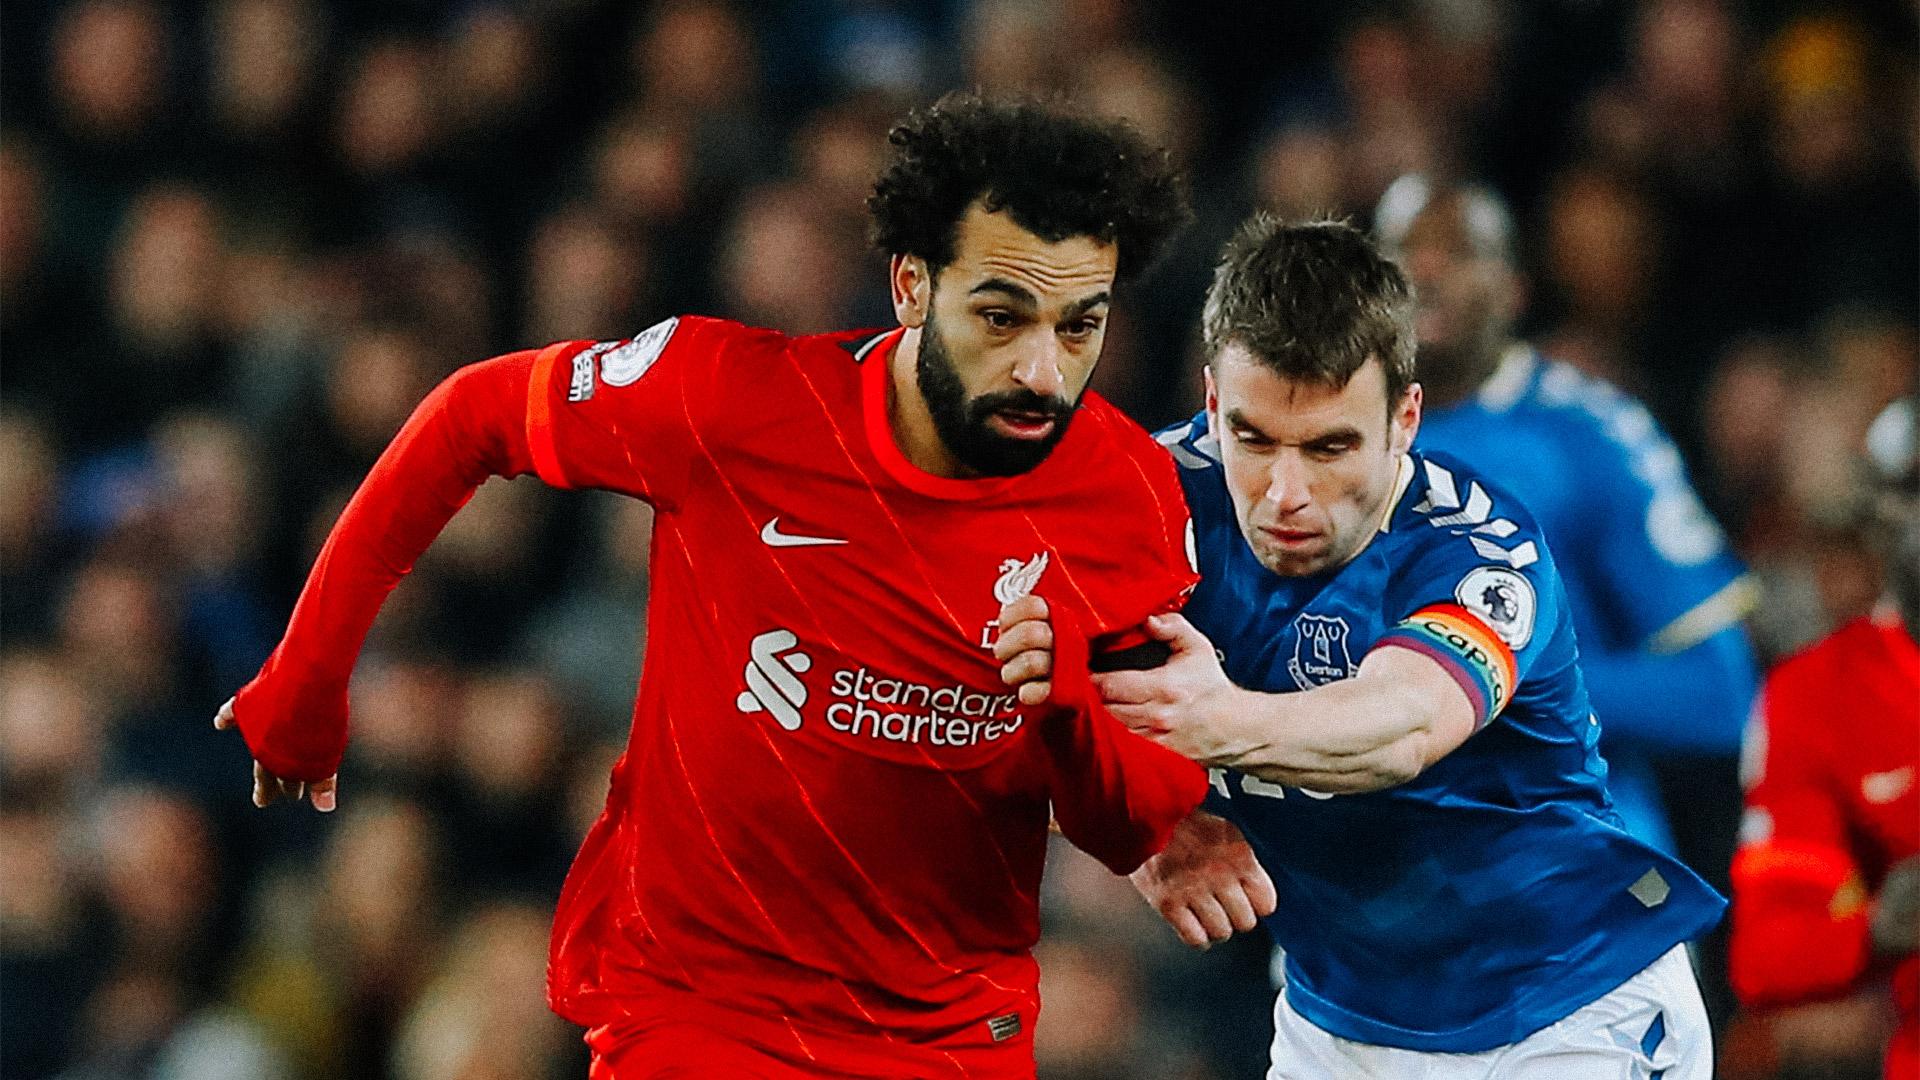 Merseyside derby 10 pre-match facts on Everton v Liverpool